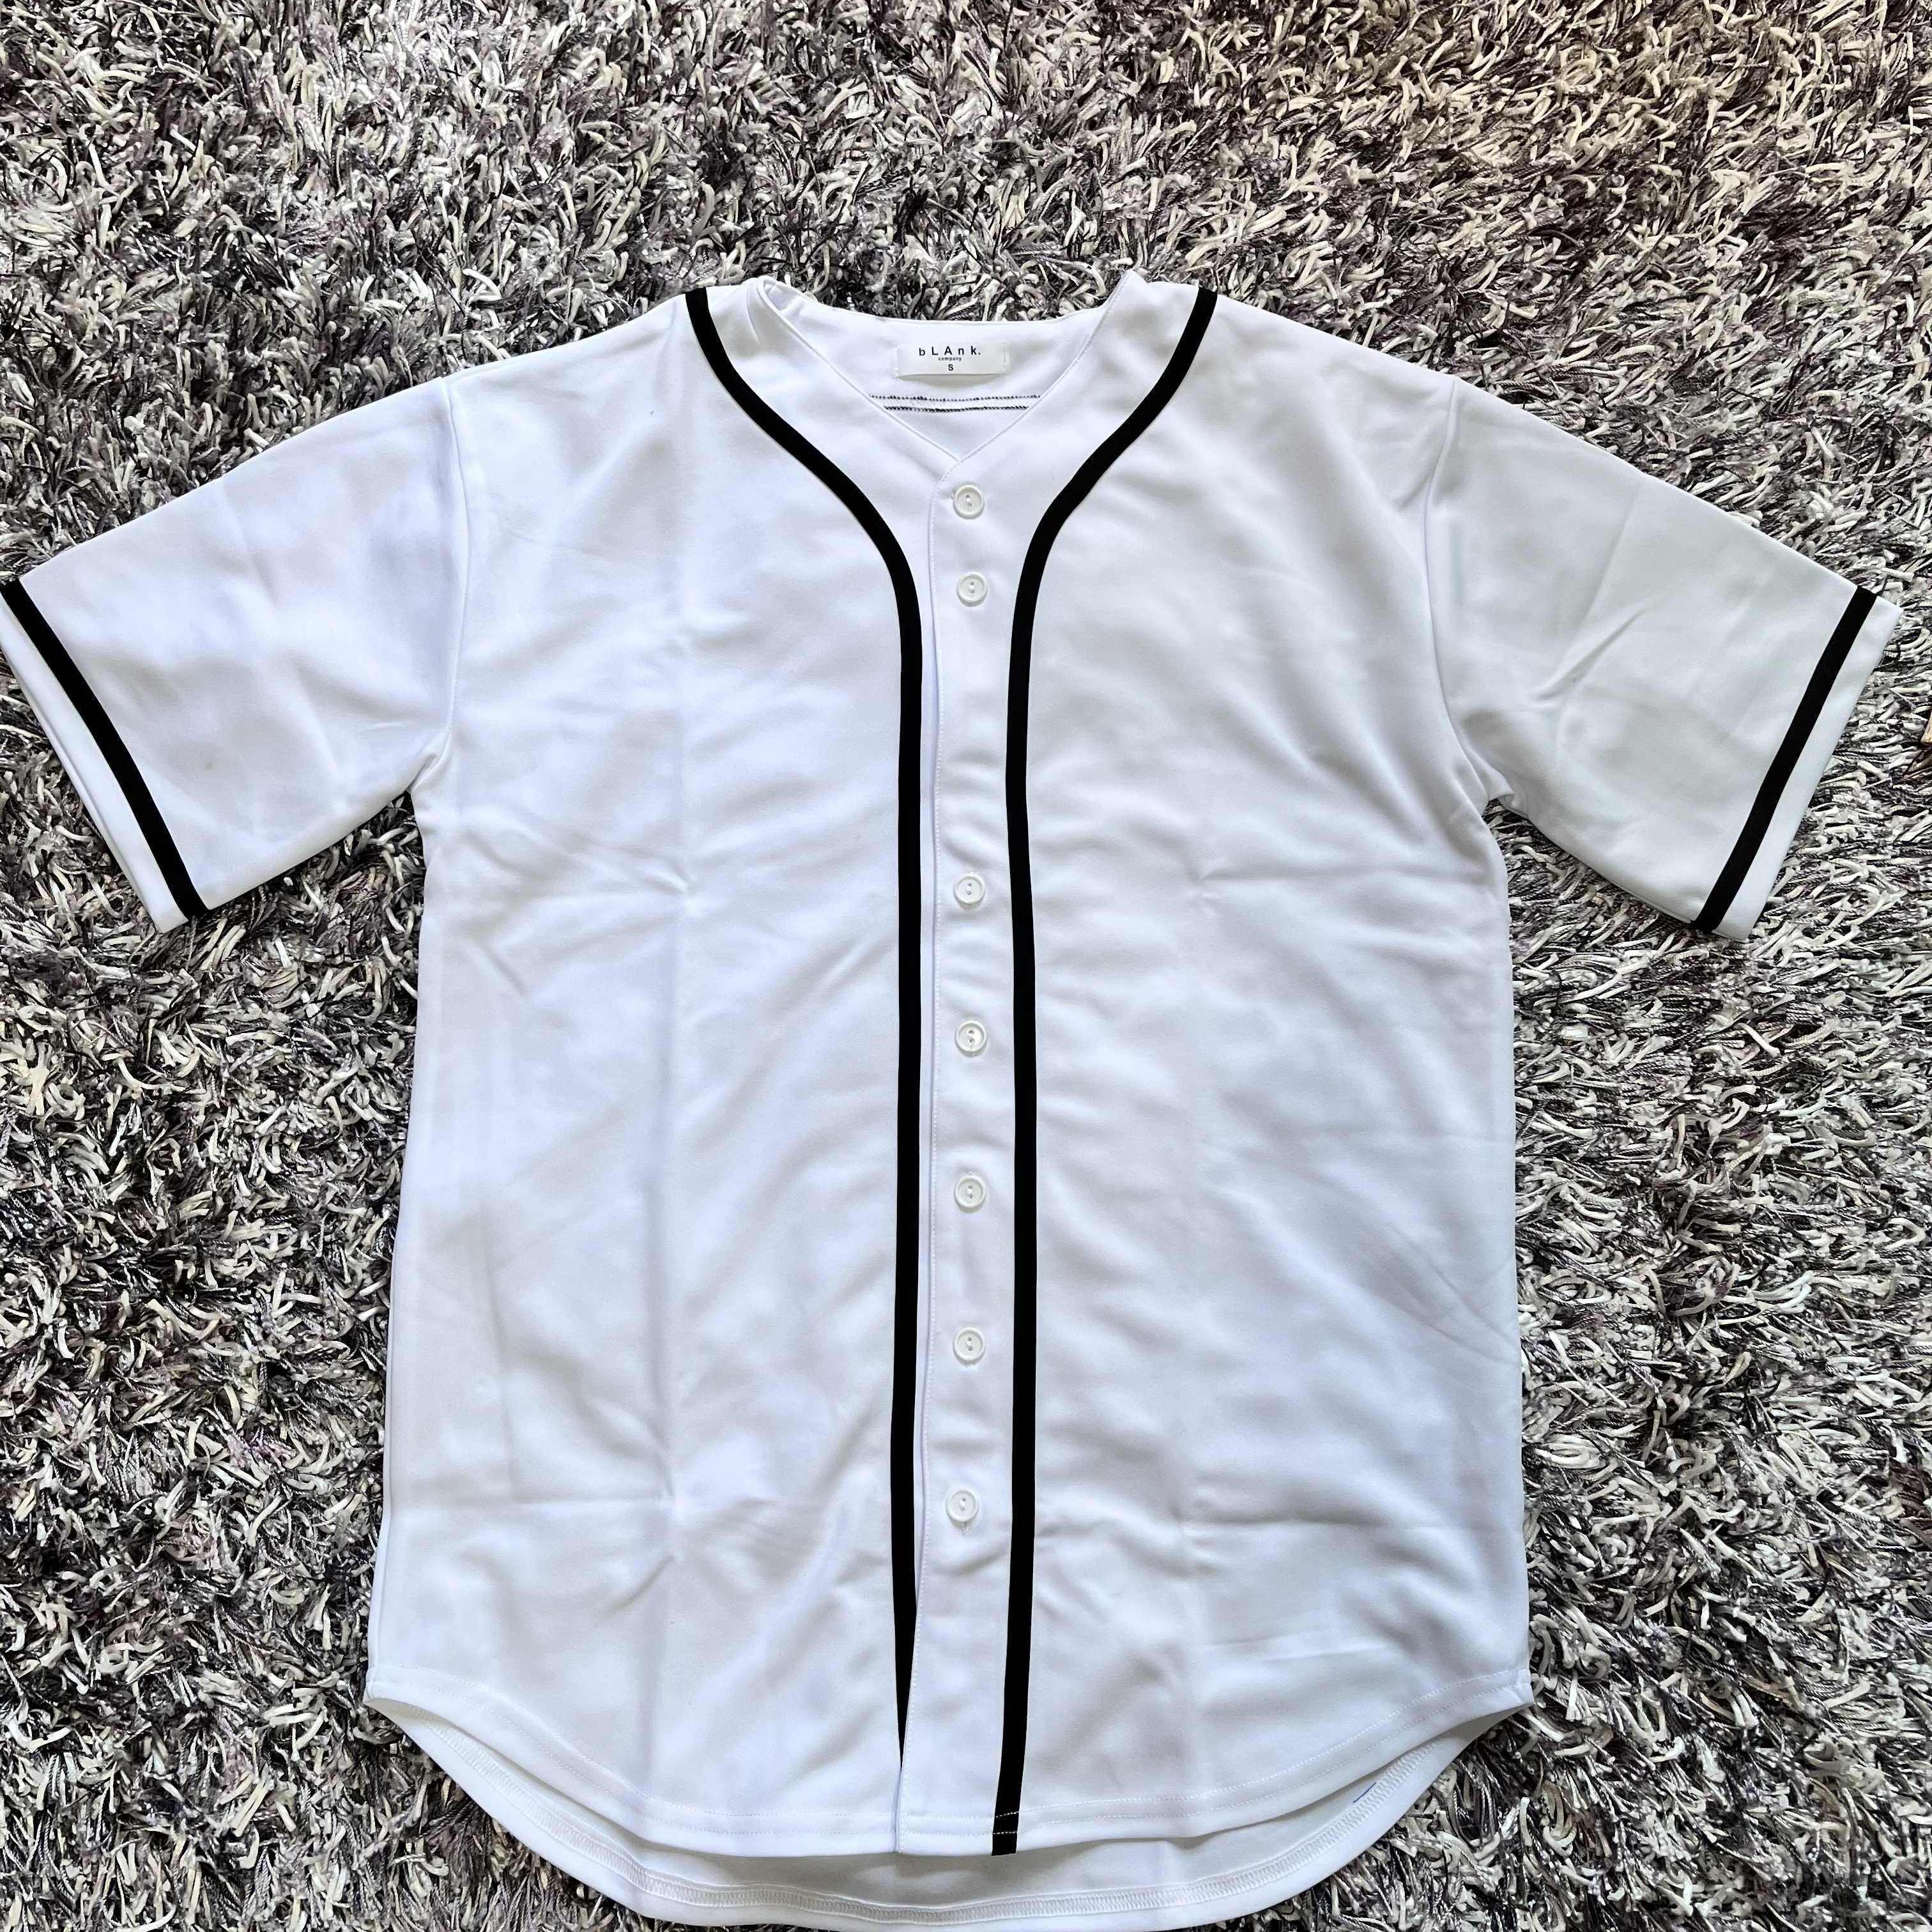 Men's Legend #824 Baseball Jersey, Retro Classic Baseball Shirt, Breathable  Embroidery Button Up Sports Uniform For Party Festival Gifts - Temu